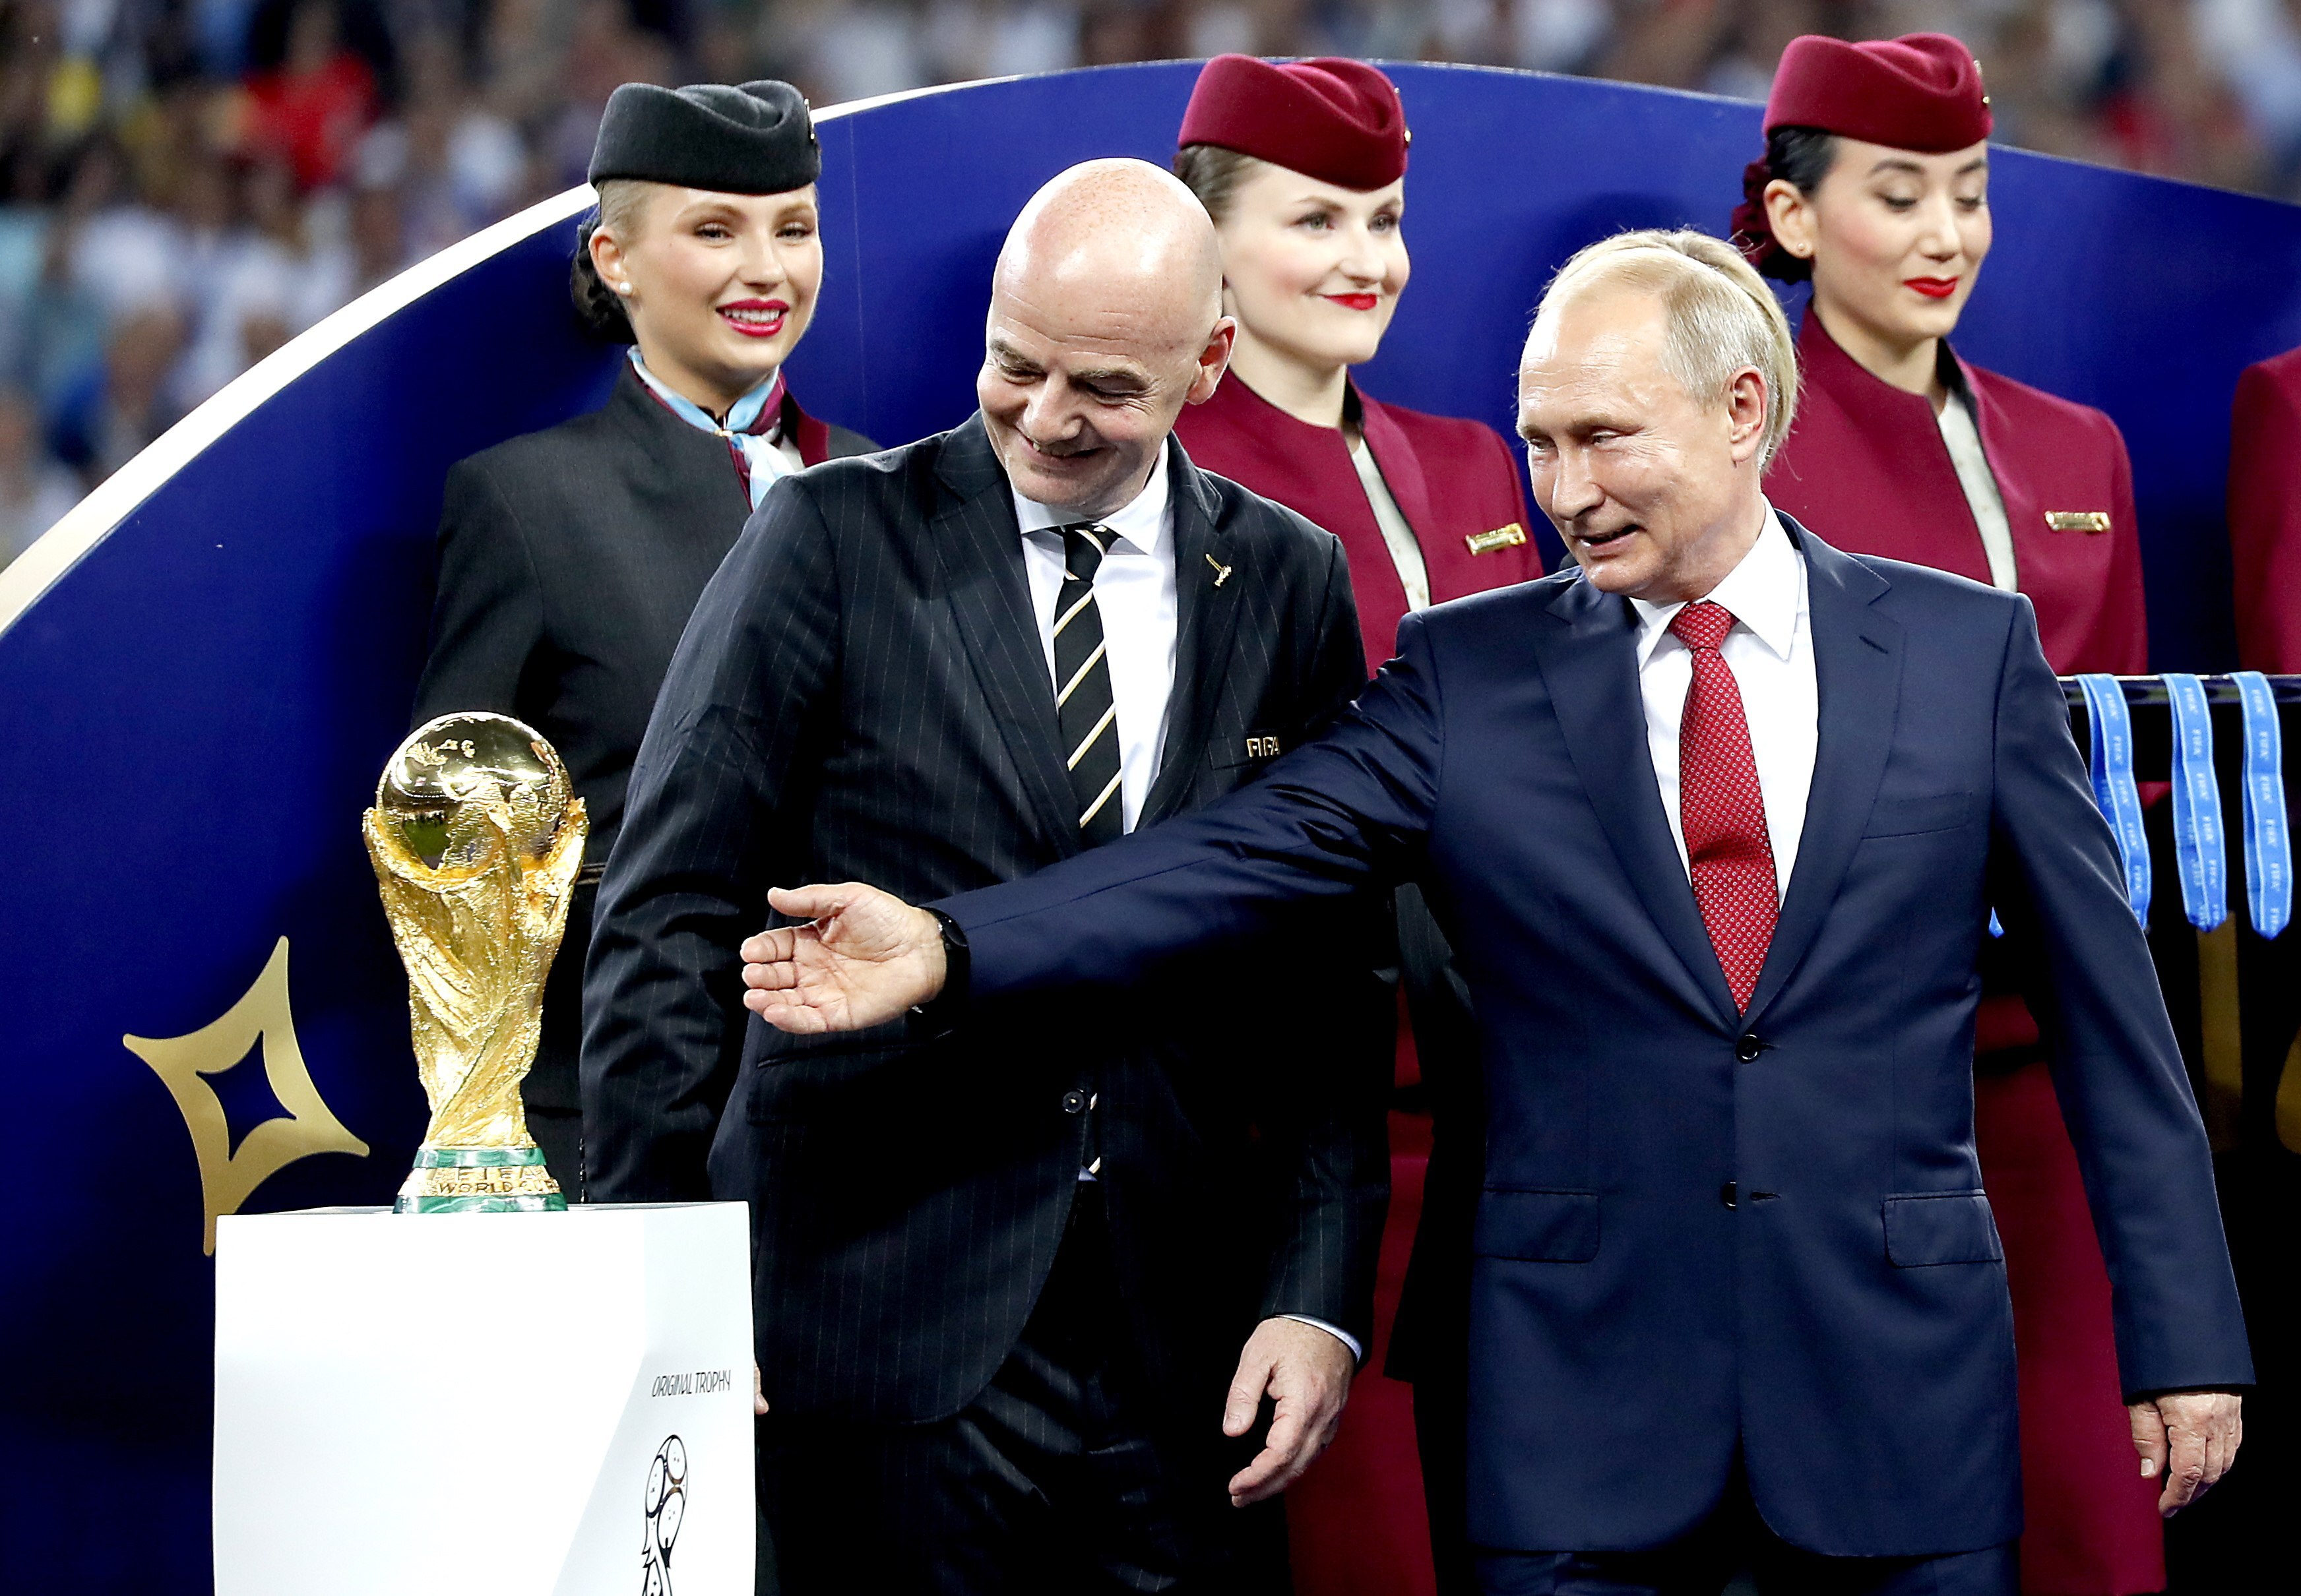 Qatar 2022 World Cup play-off match with Russia 'almost unthinkable',  Swedish FA boss says after assault on Ukraine | South China Morning Post